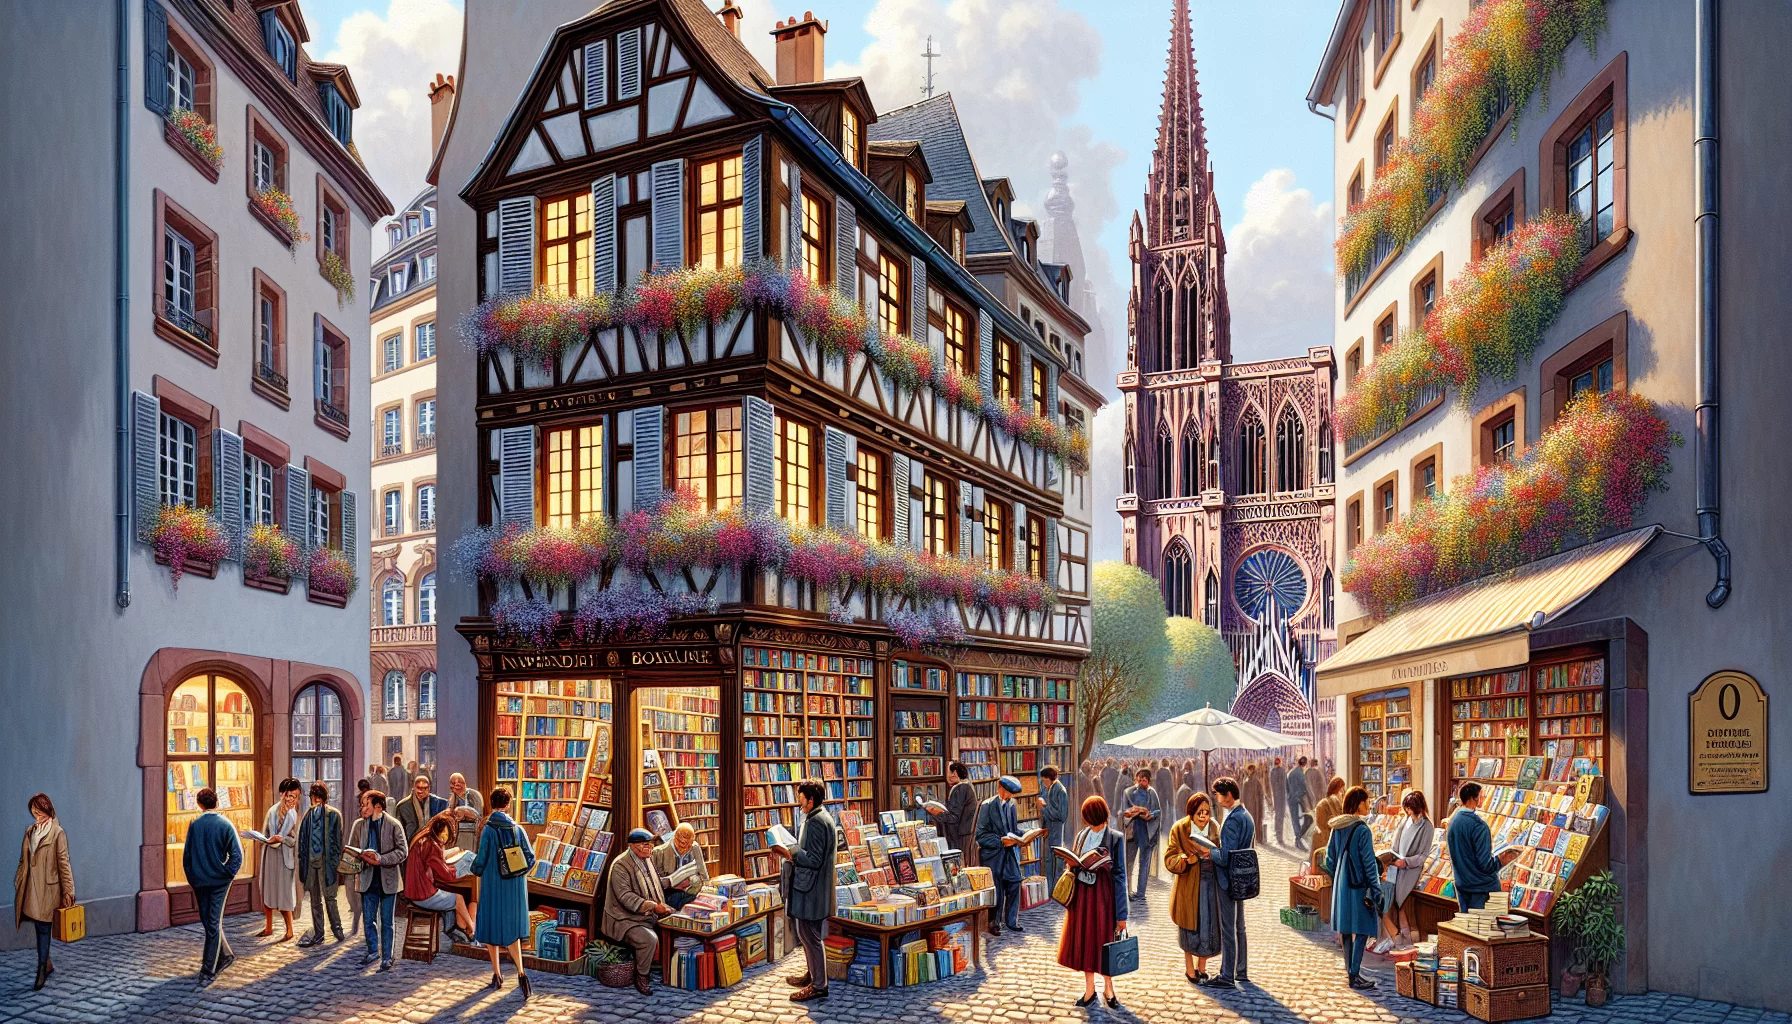 Strasbourg: the emerging literary capital with blooming independent bookstores